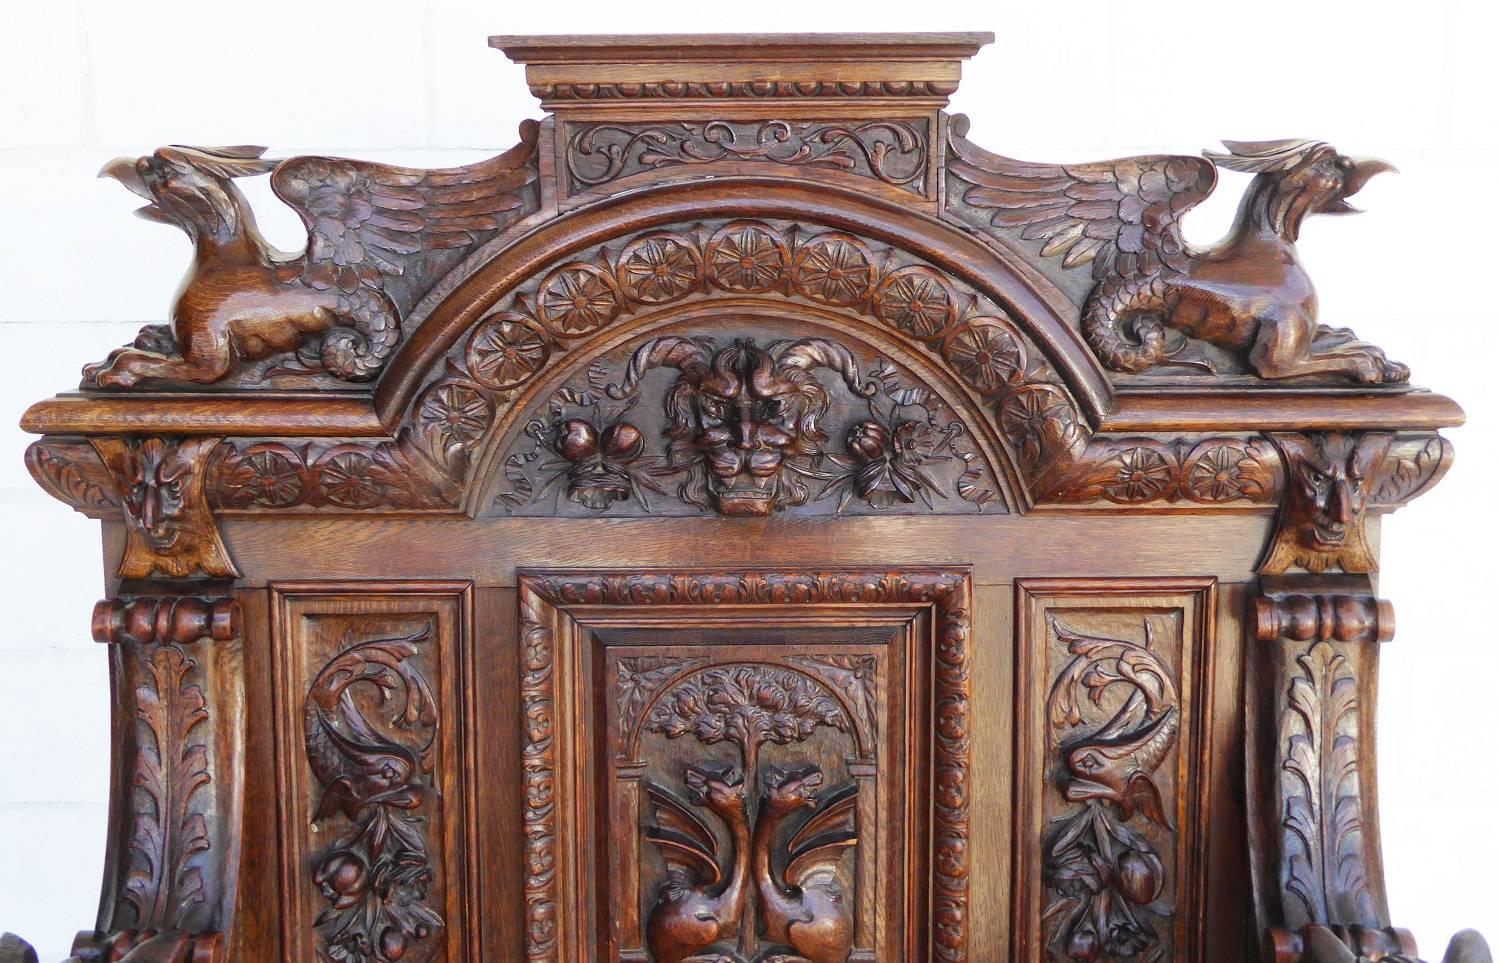 For sale is an extremely high quality carved bench. The top of the bench has two ornately carved griffins, one on either side. Between the griffins is an intricately carved mask with fruit on either side. The arms of the bench are heavily carved